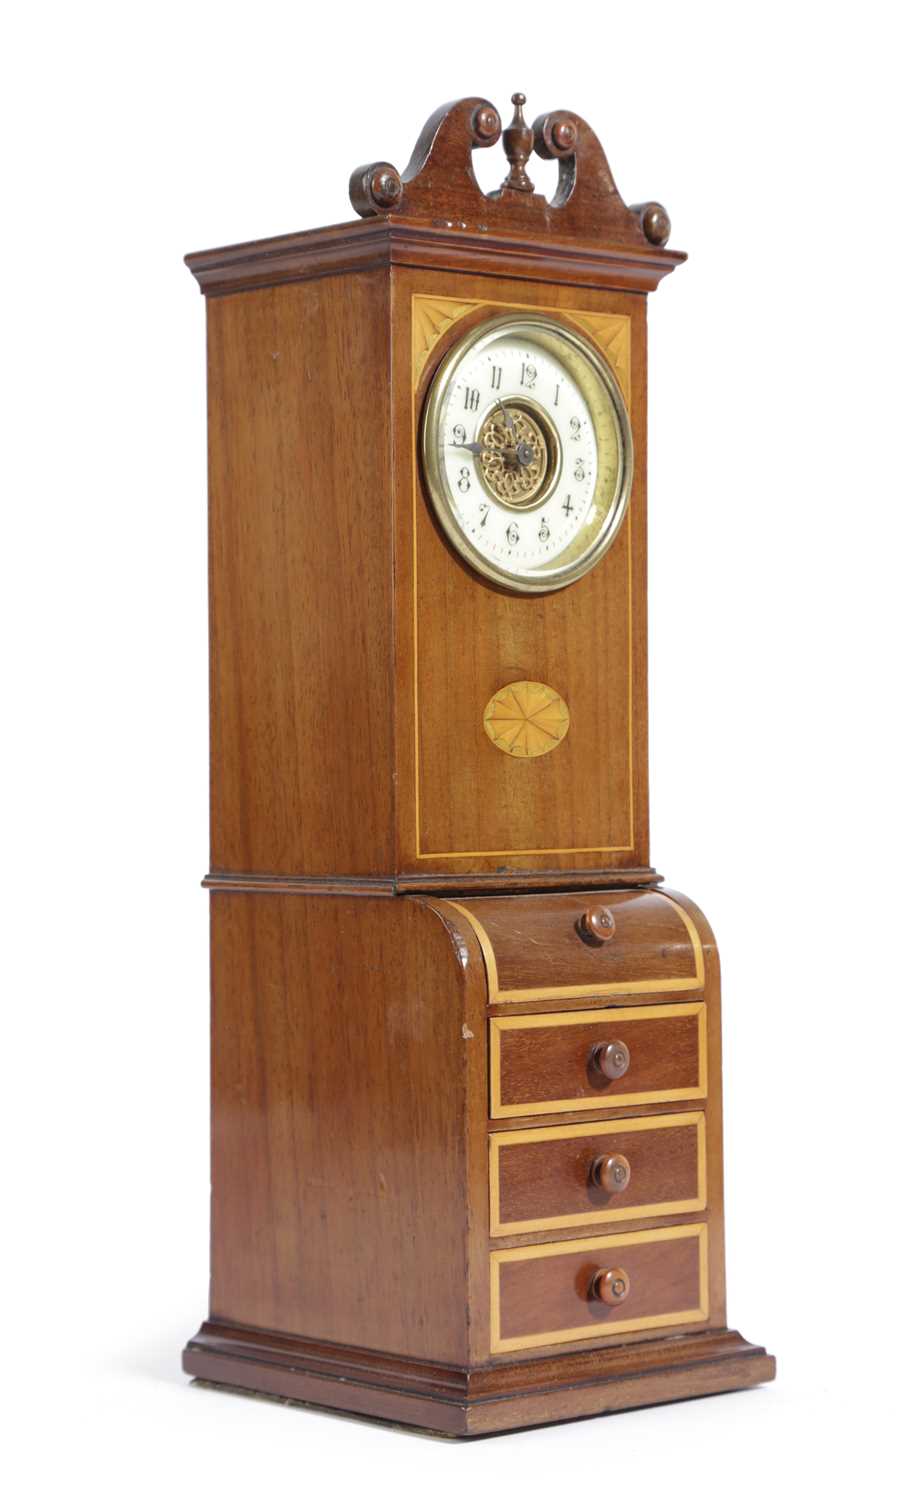 A MAHOGANY AND INLAID 'LONGCASE CLOCK' TABLE TIMEPIECE IN SHERATON REVIVAL STYLE, EARLY 20TH CENTURY